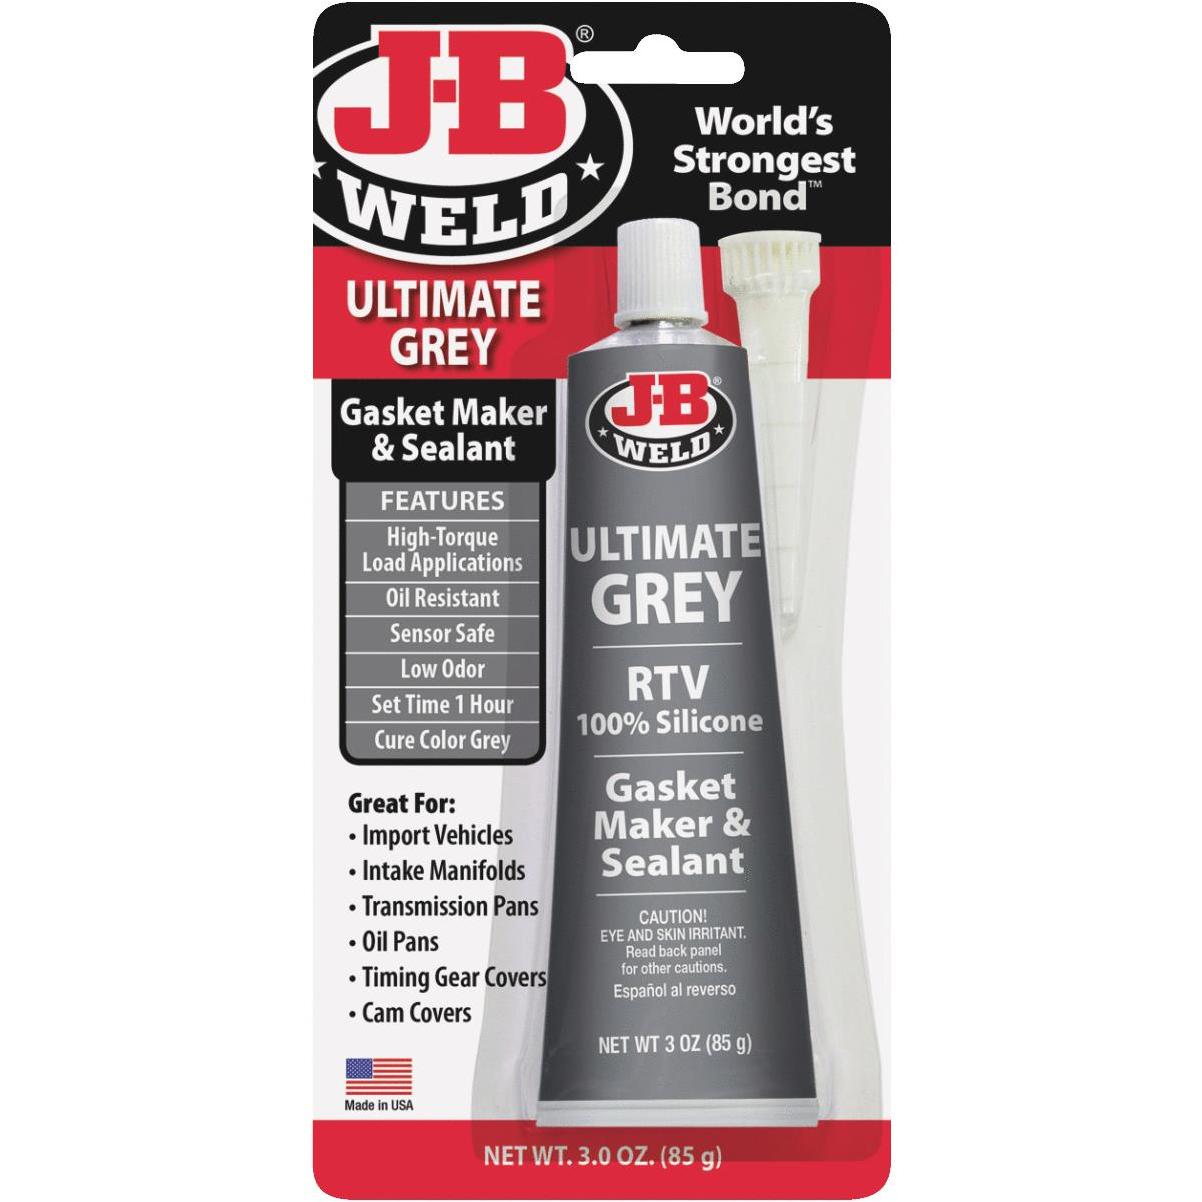 Imperial Non-Chlorinated Brake Cleaner, 14 oz. Aerosol Can